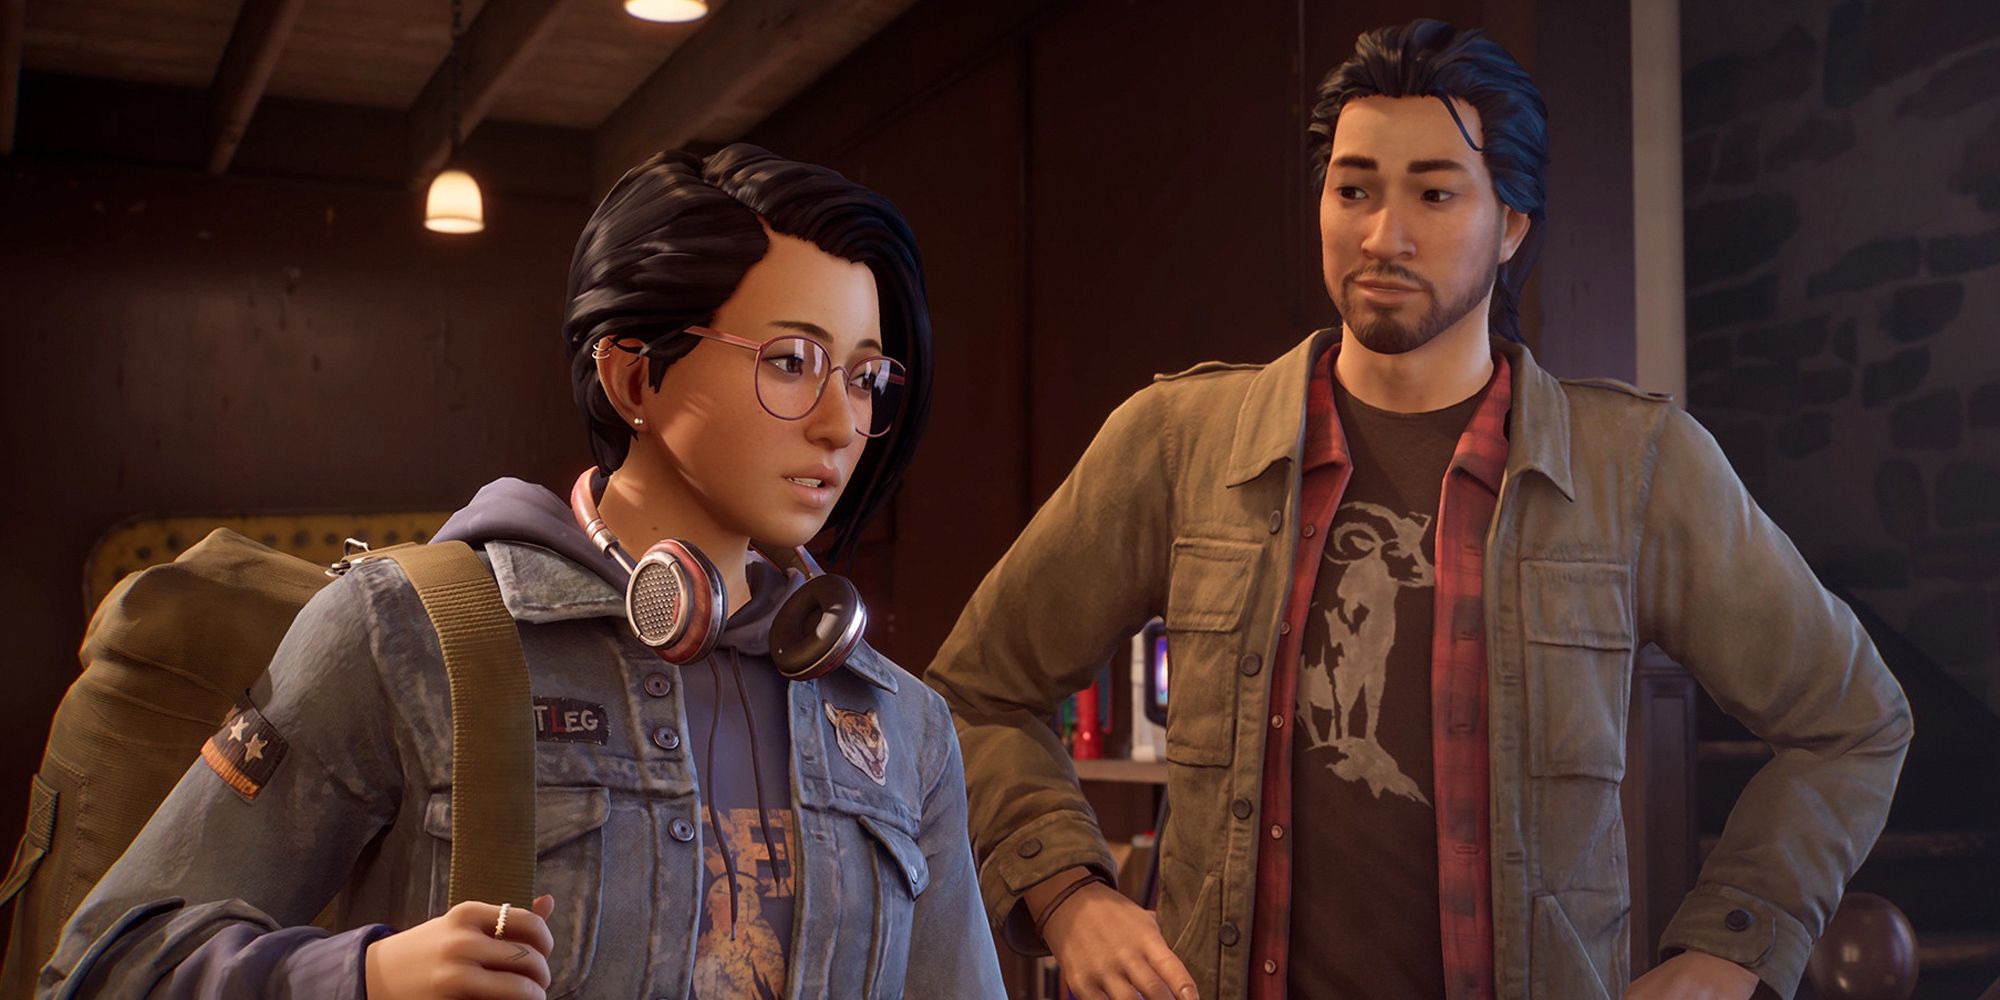 Alex and Gabe Chen in Life Is Strange: True Colors. Alex looks uneasy, Gabe looks happy.